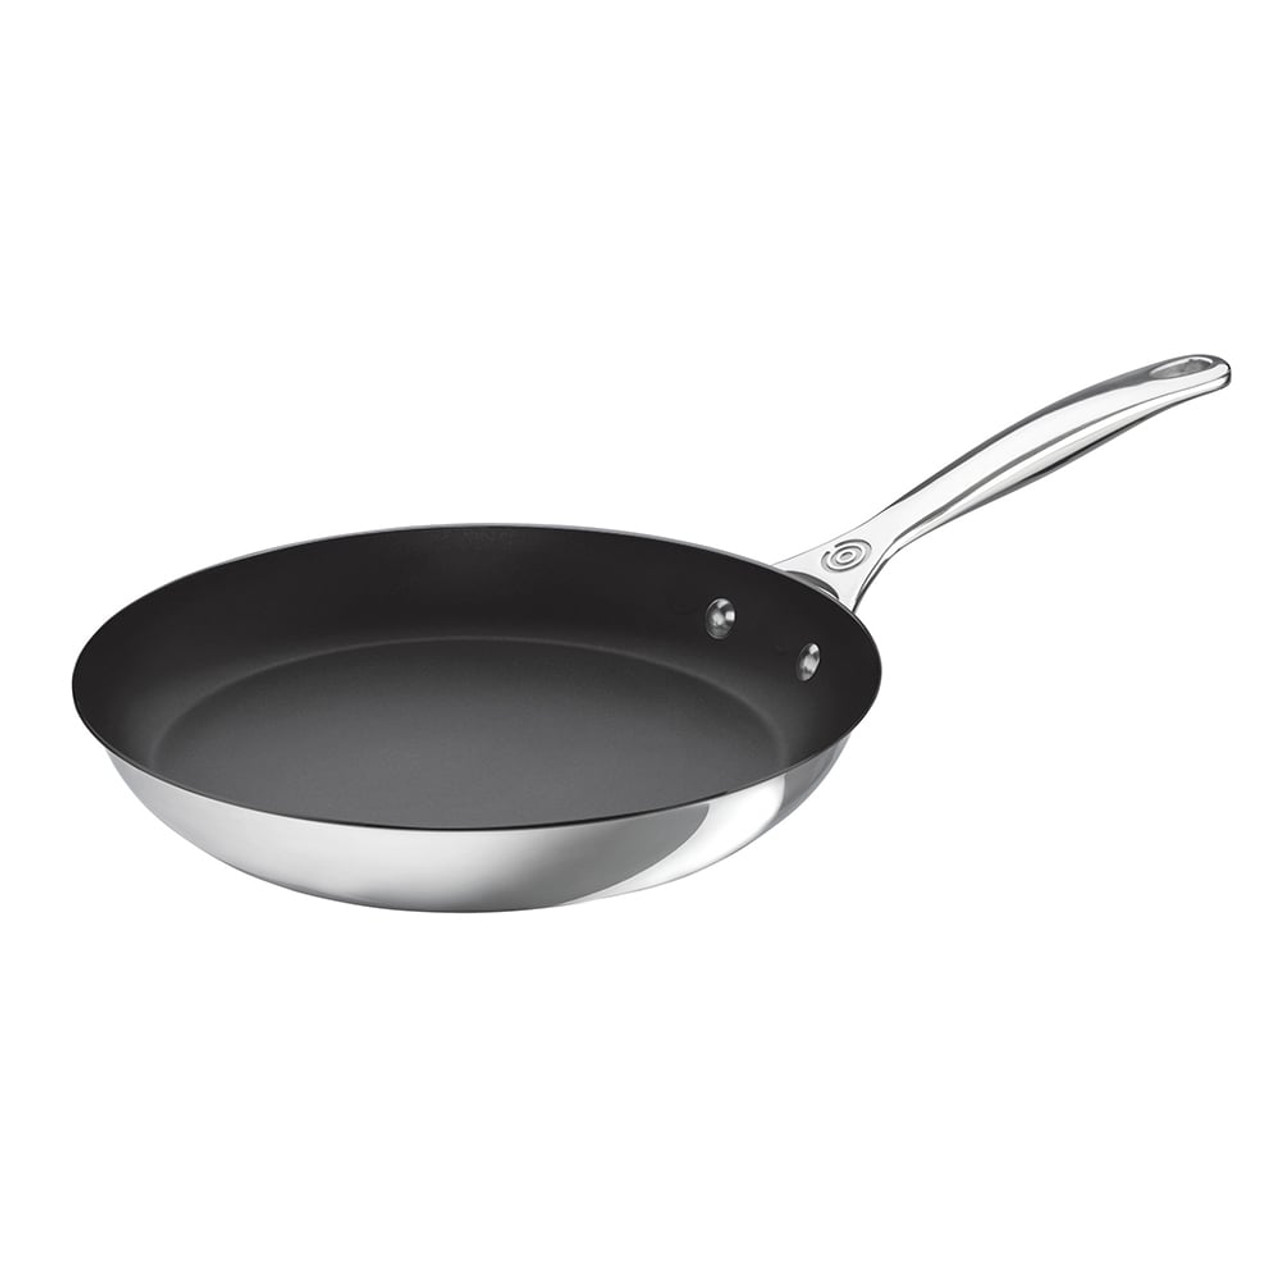 Le Creuset Stainless Steel Fry Pan 8-Inch - Fante's Kitchen Shop